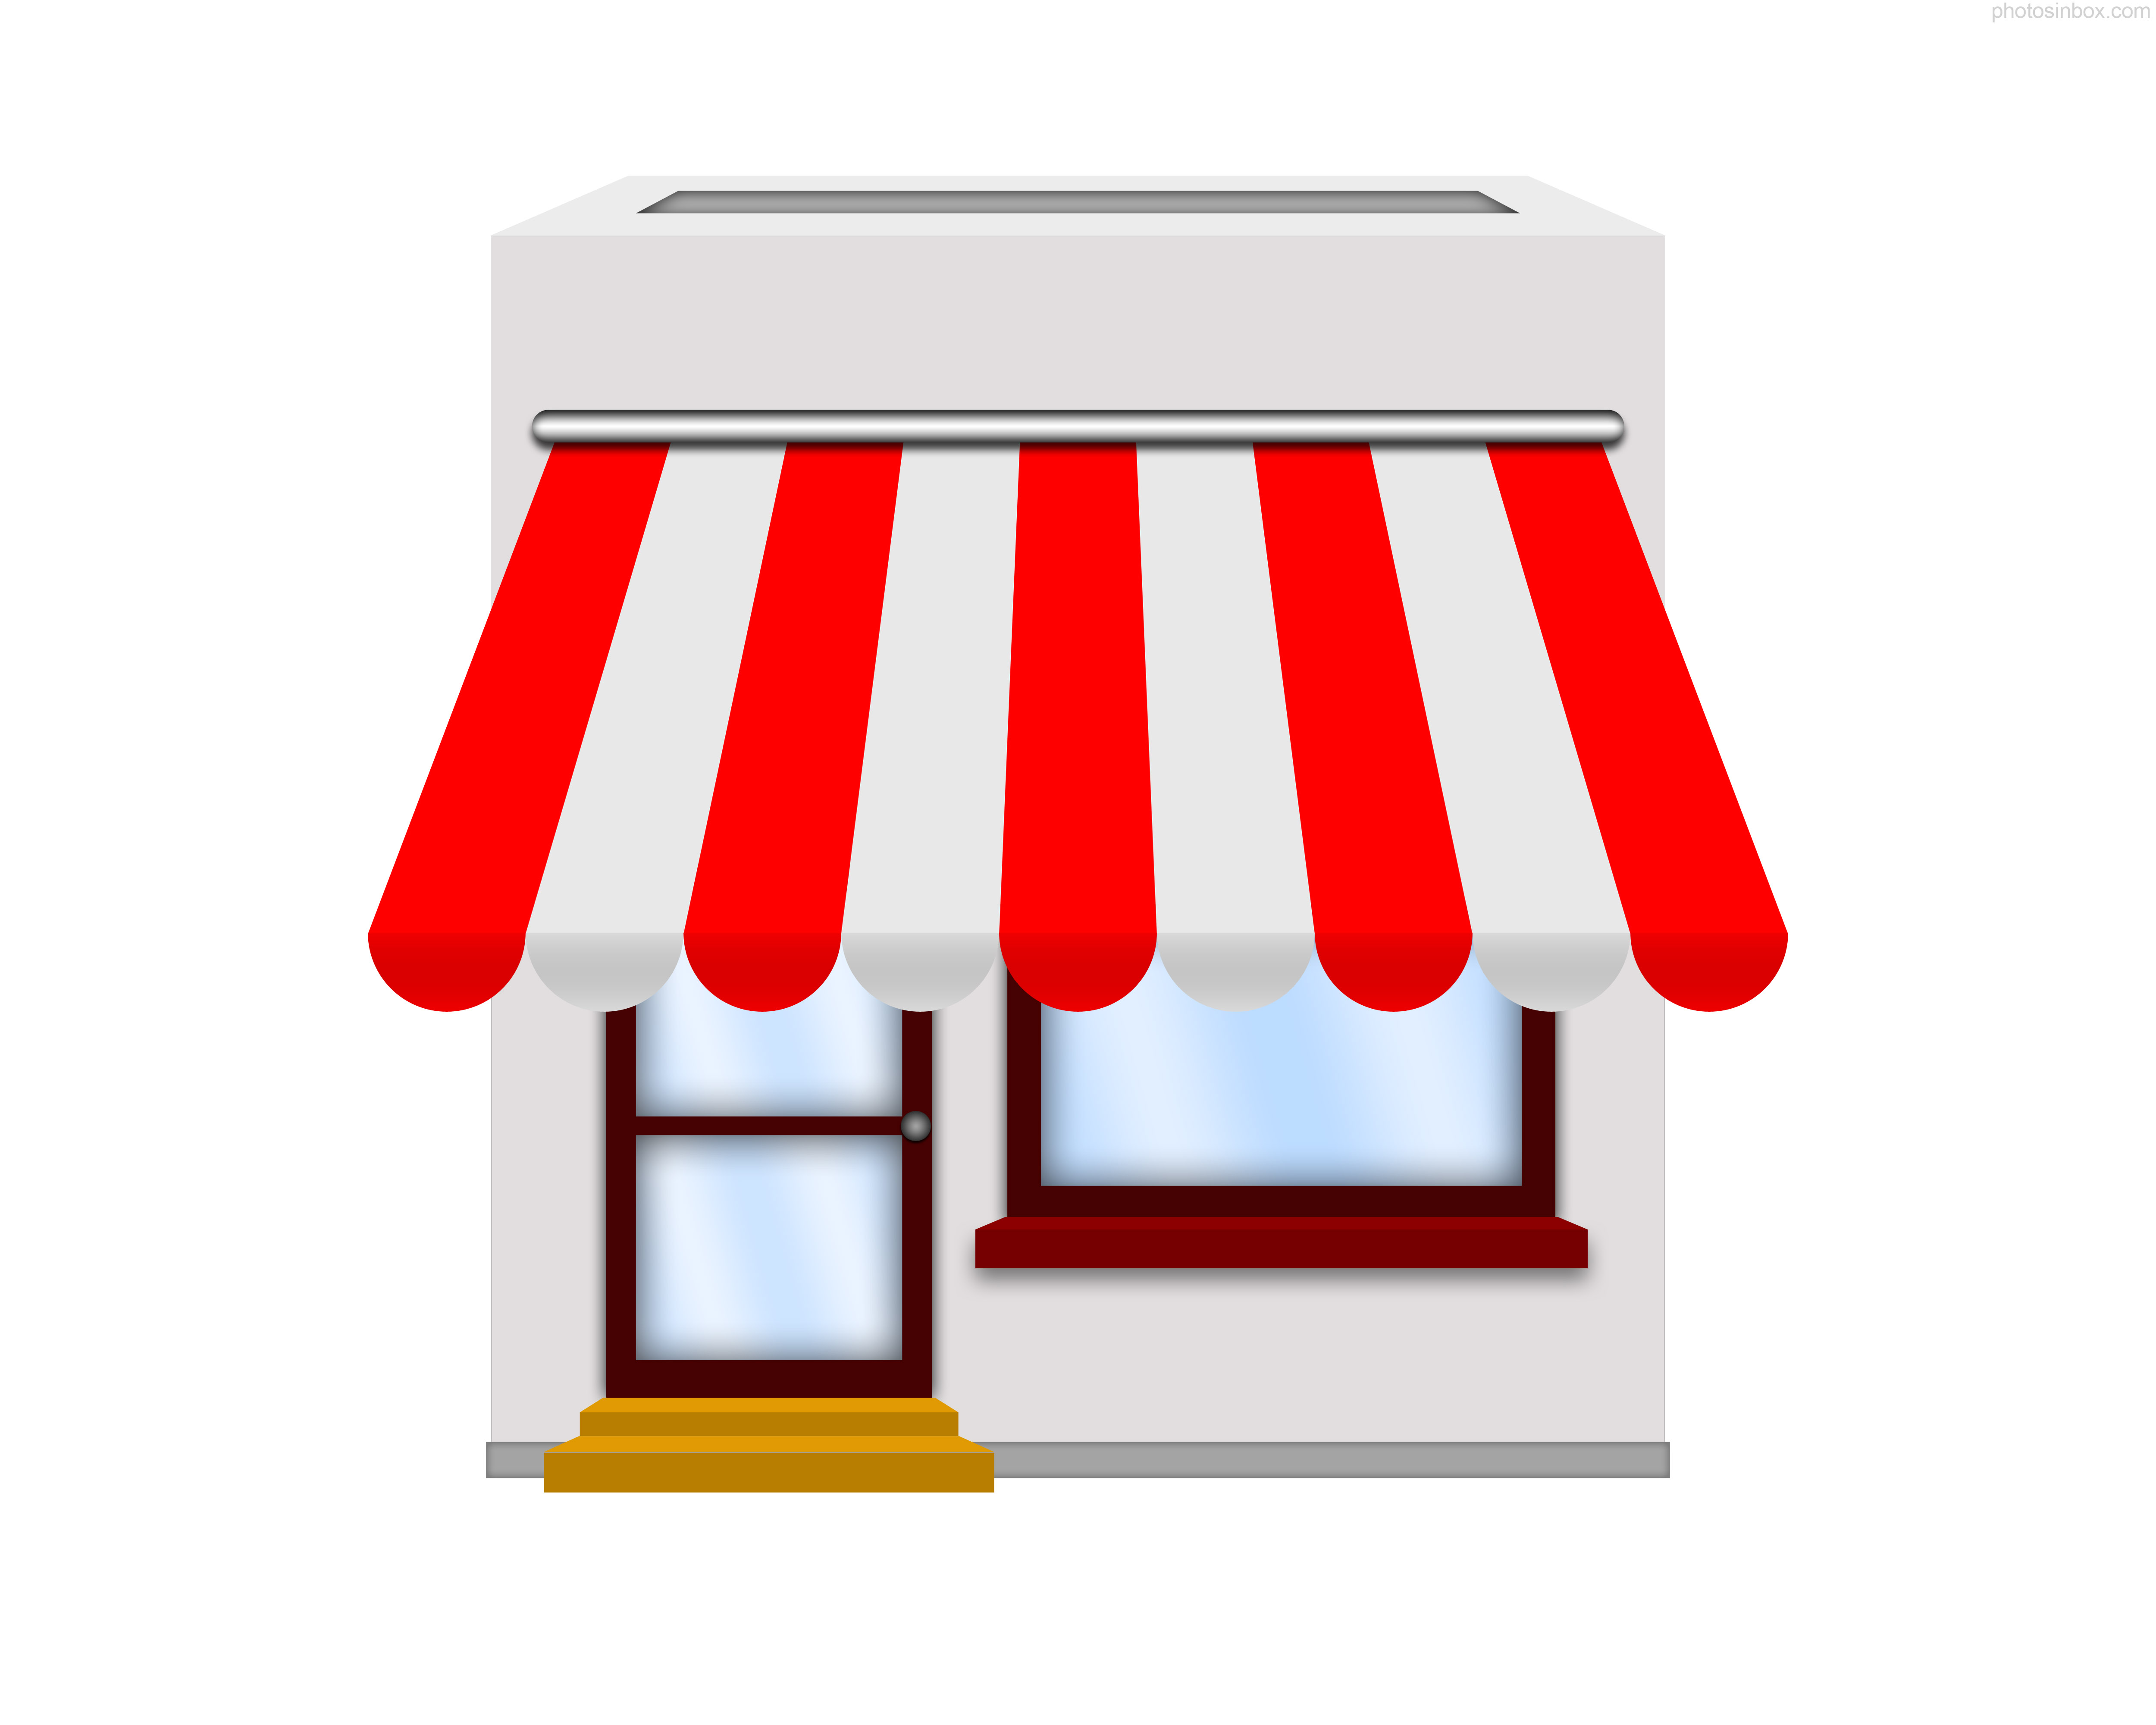 Store Icon Png